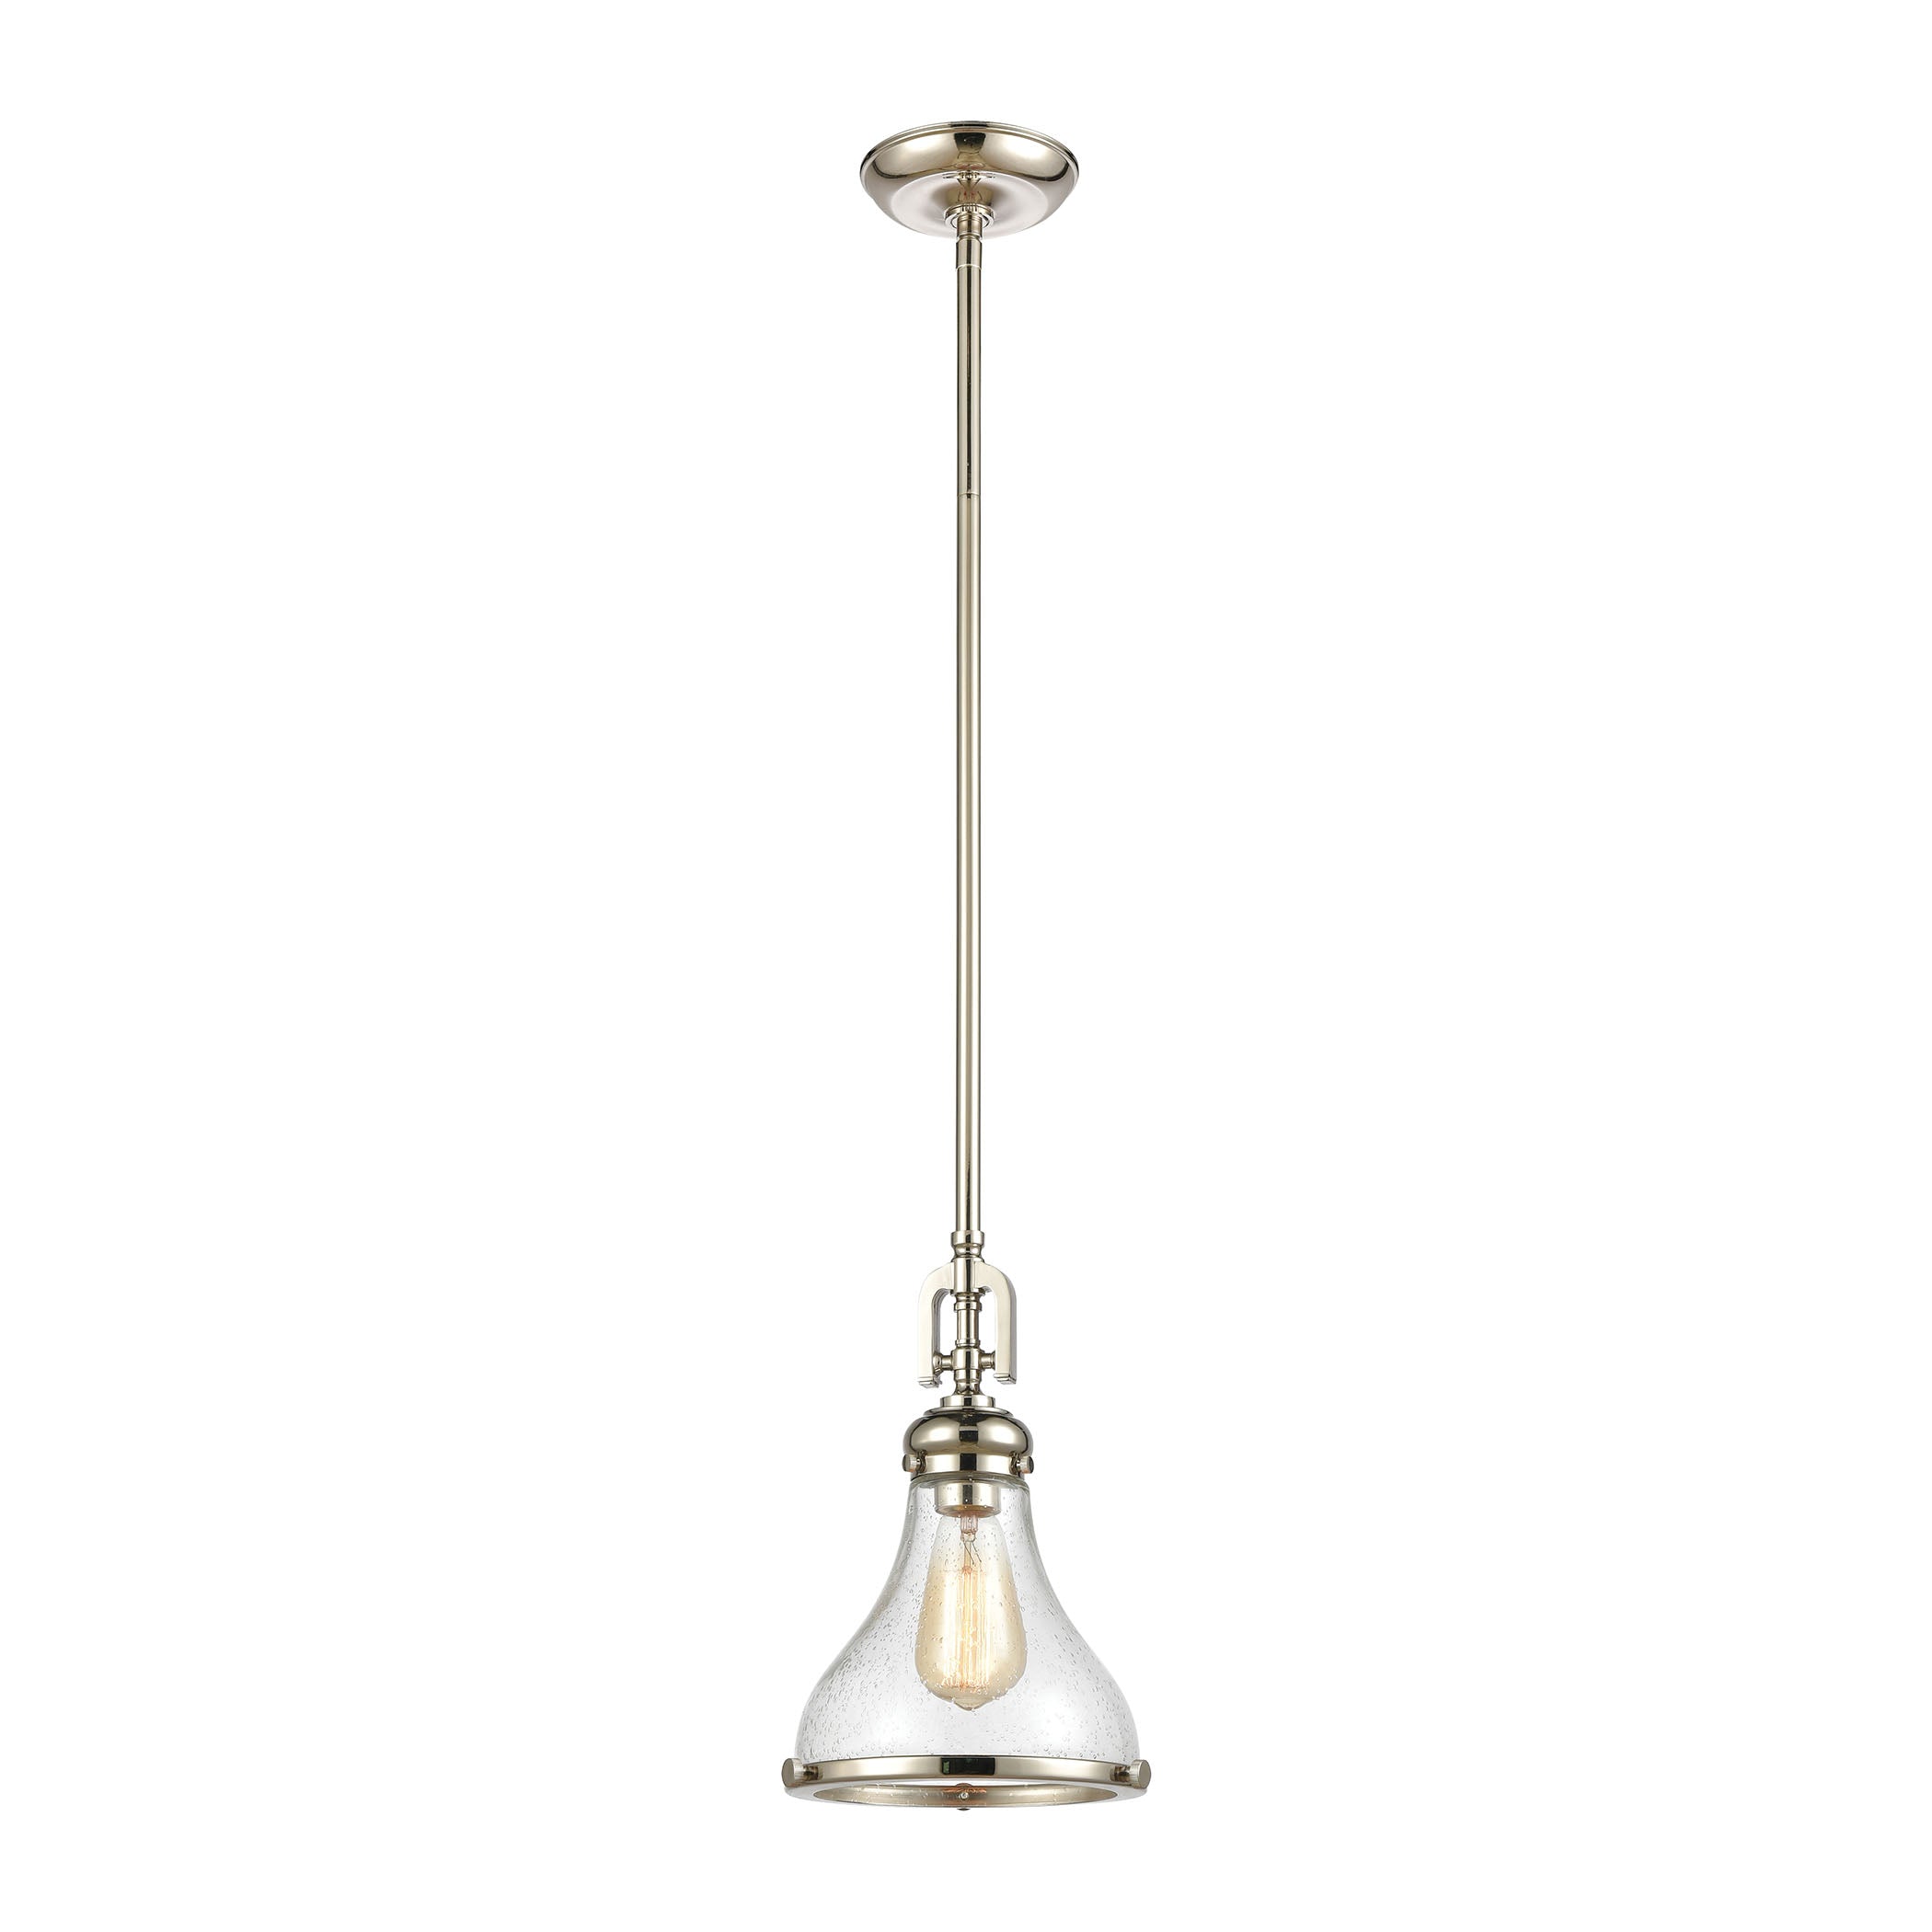 ELK Lighting 57380/1 Rutherford 1-Light Mini Pendant in Polished Nickel with Seedy Glass